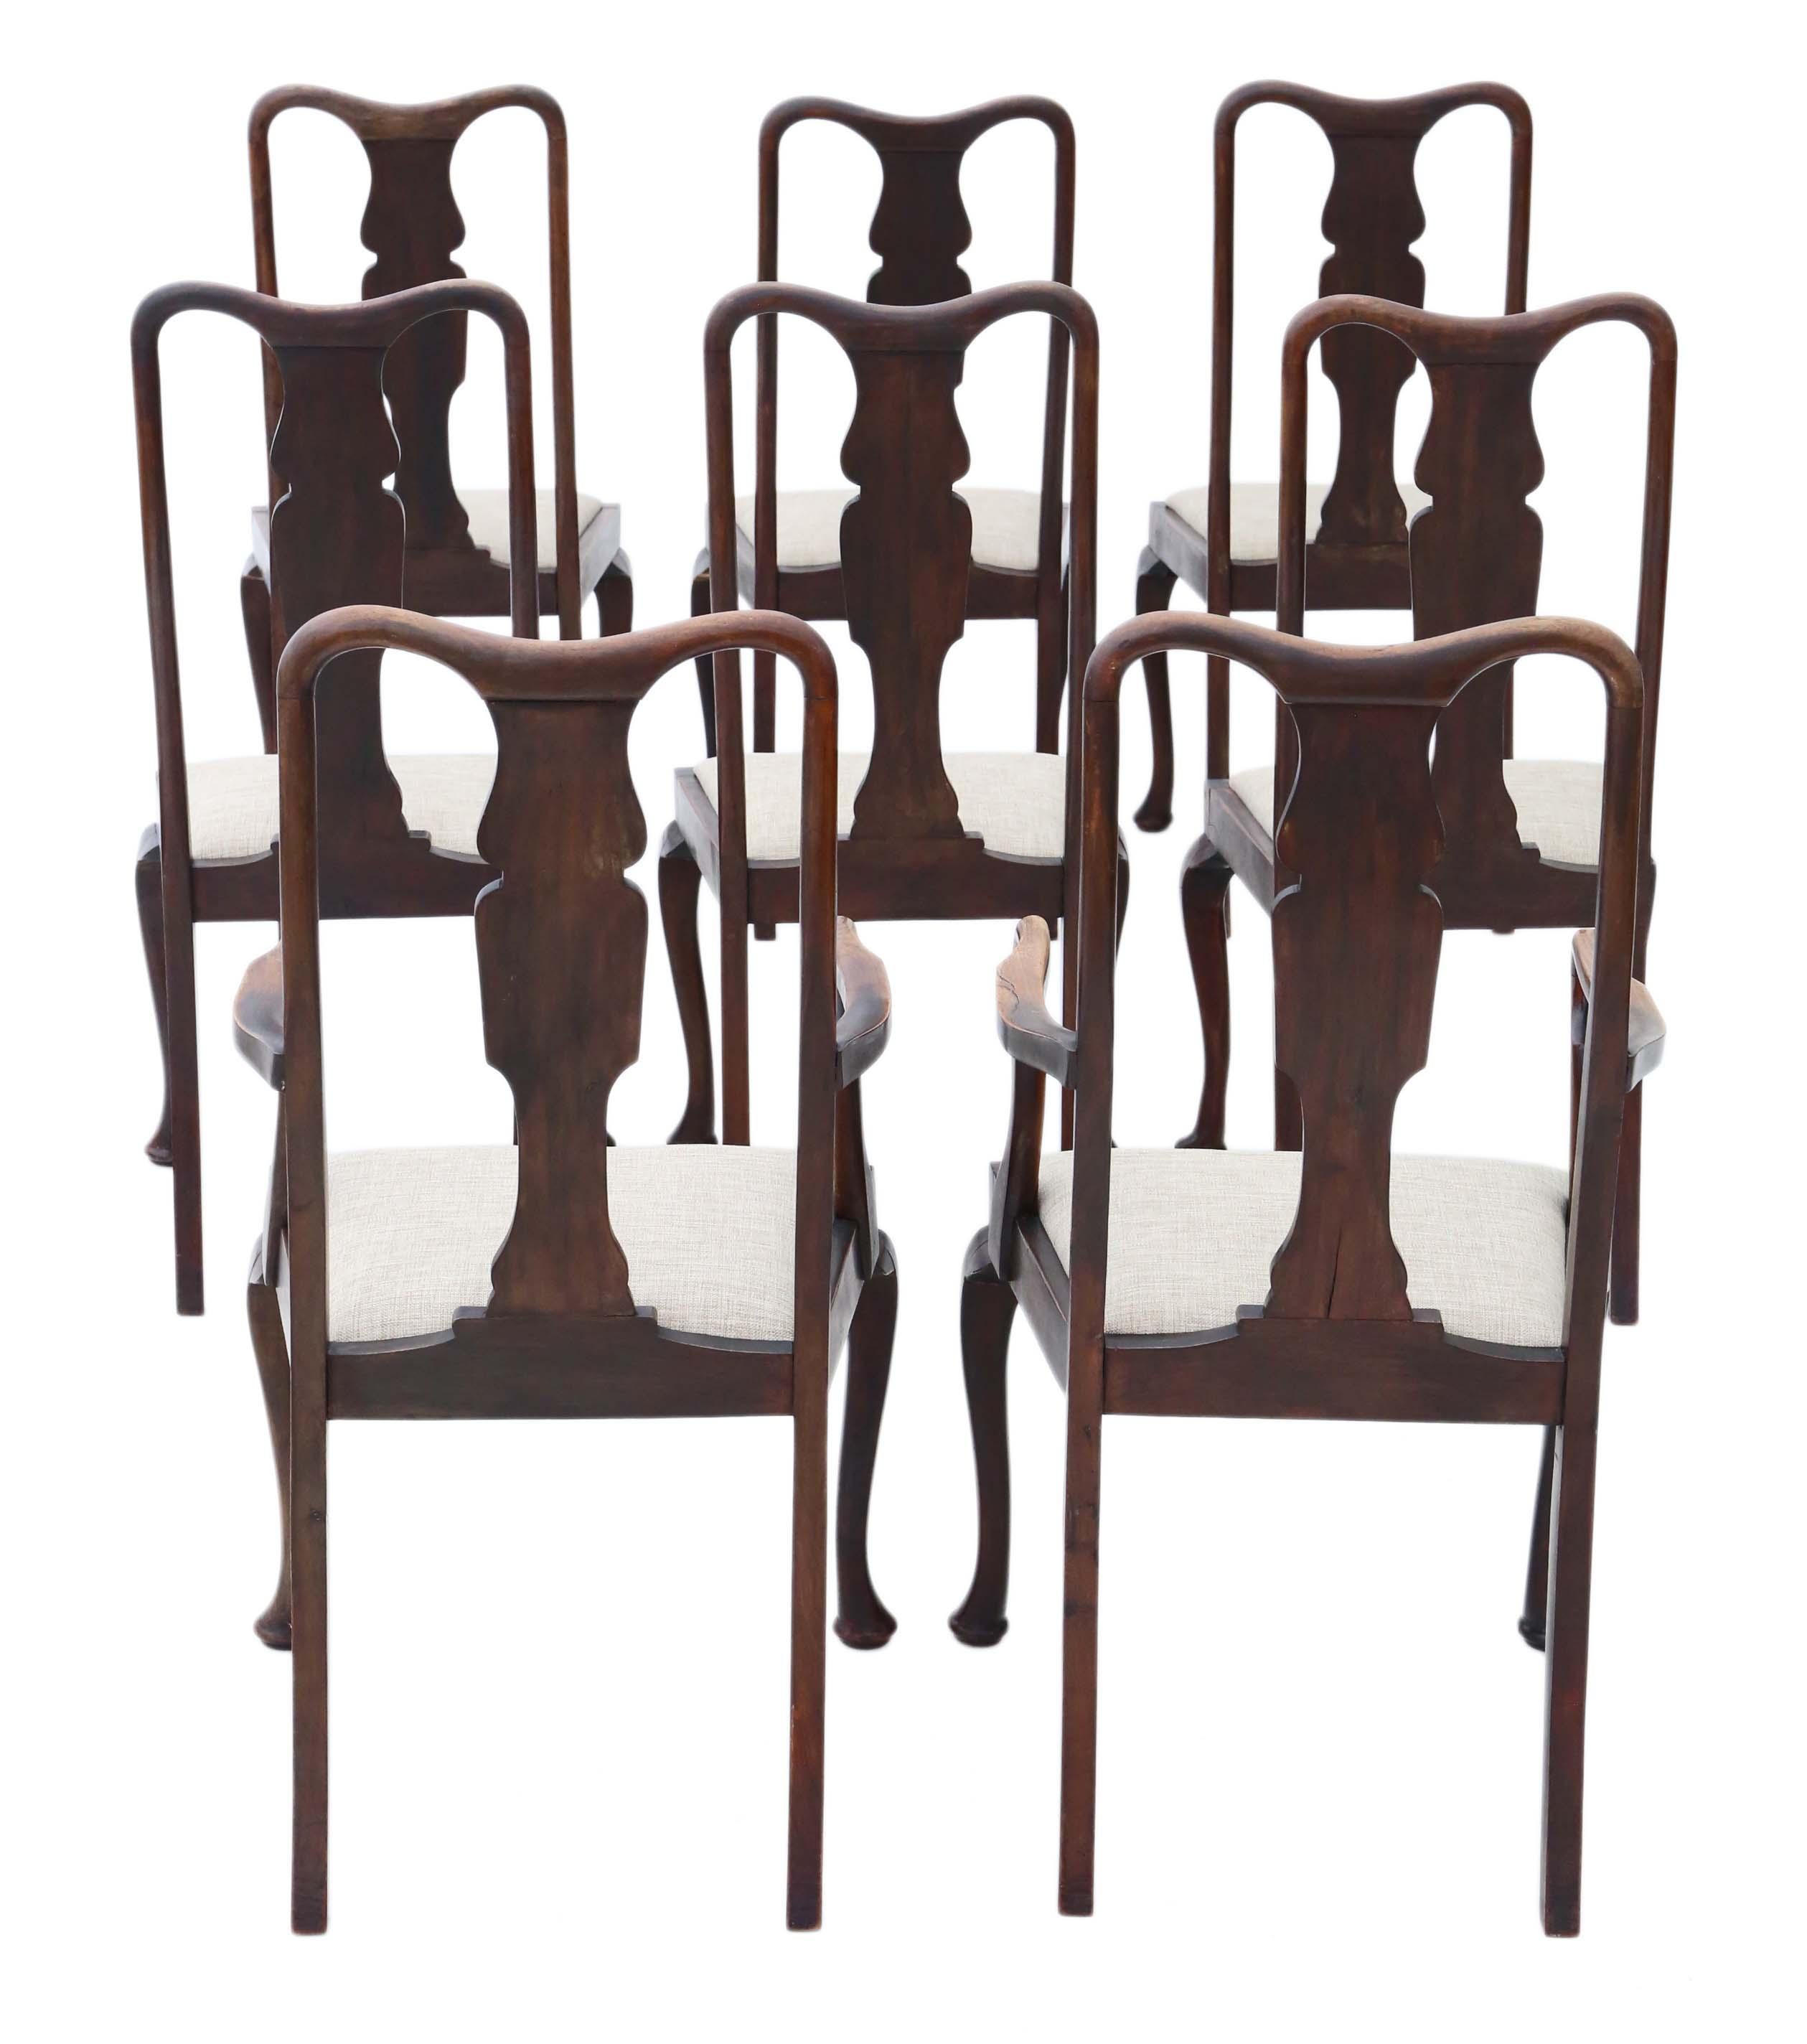 Antique set of 8 (6+2) mahogany Queen Anne revival dining chairs.
Date from circa 1910.
No loose joints and no woodworm. Great Queen Anne styling.
New upholstery.
Overall maximum dimensions:
Chair, 53cm W x 53cm D x 110cm H (47cm H seat when